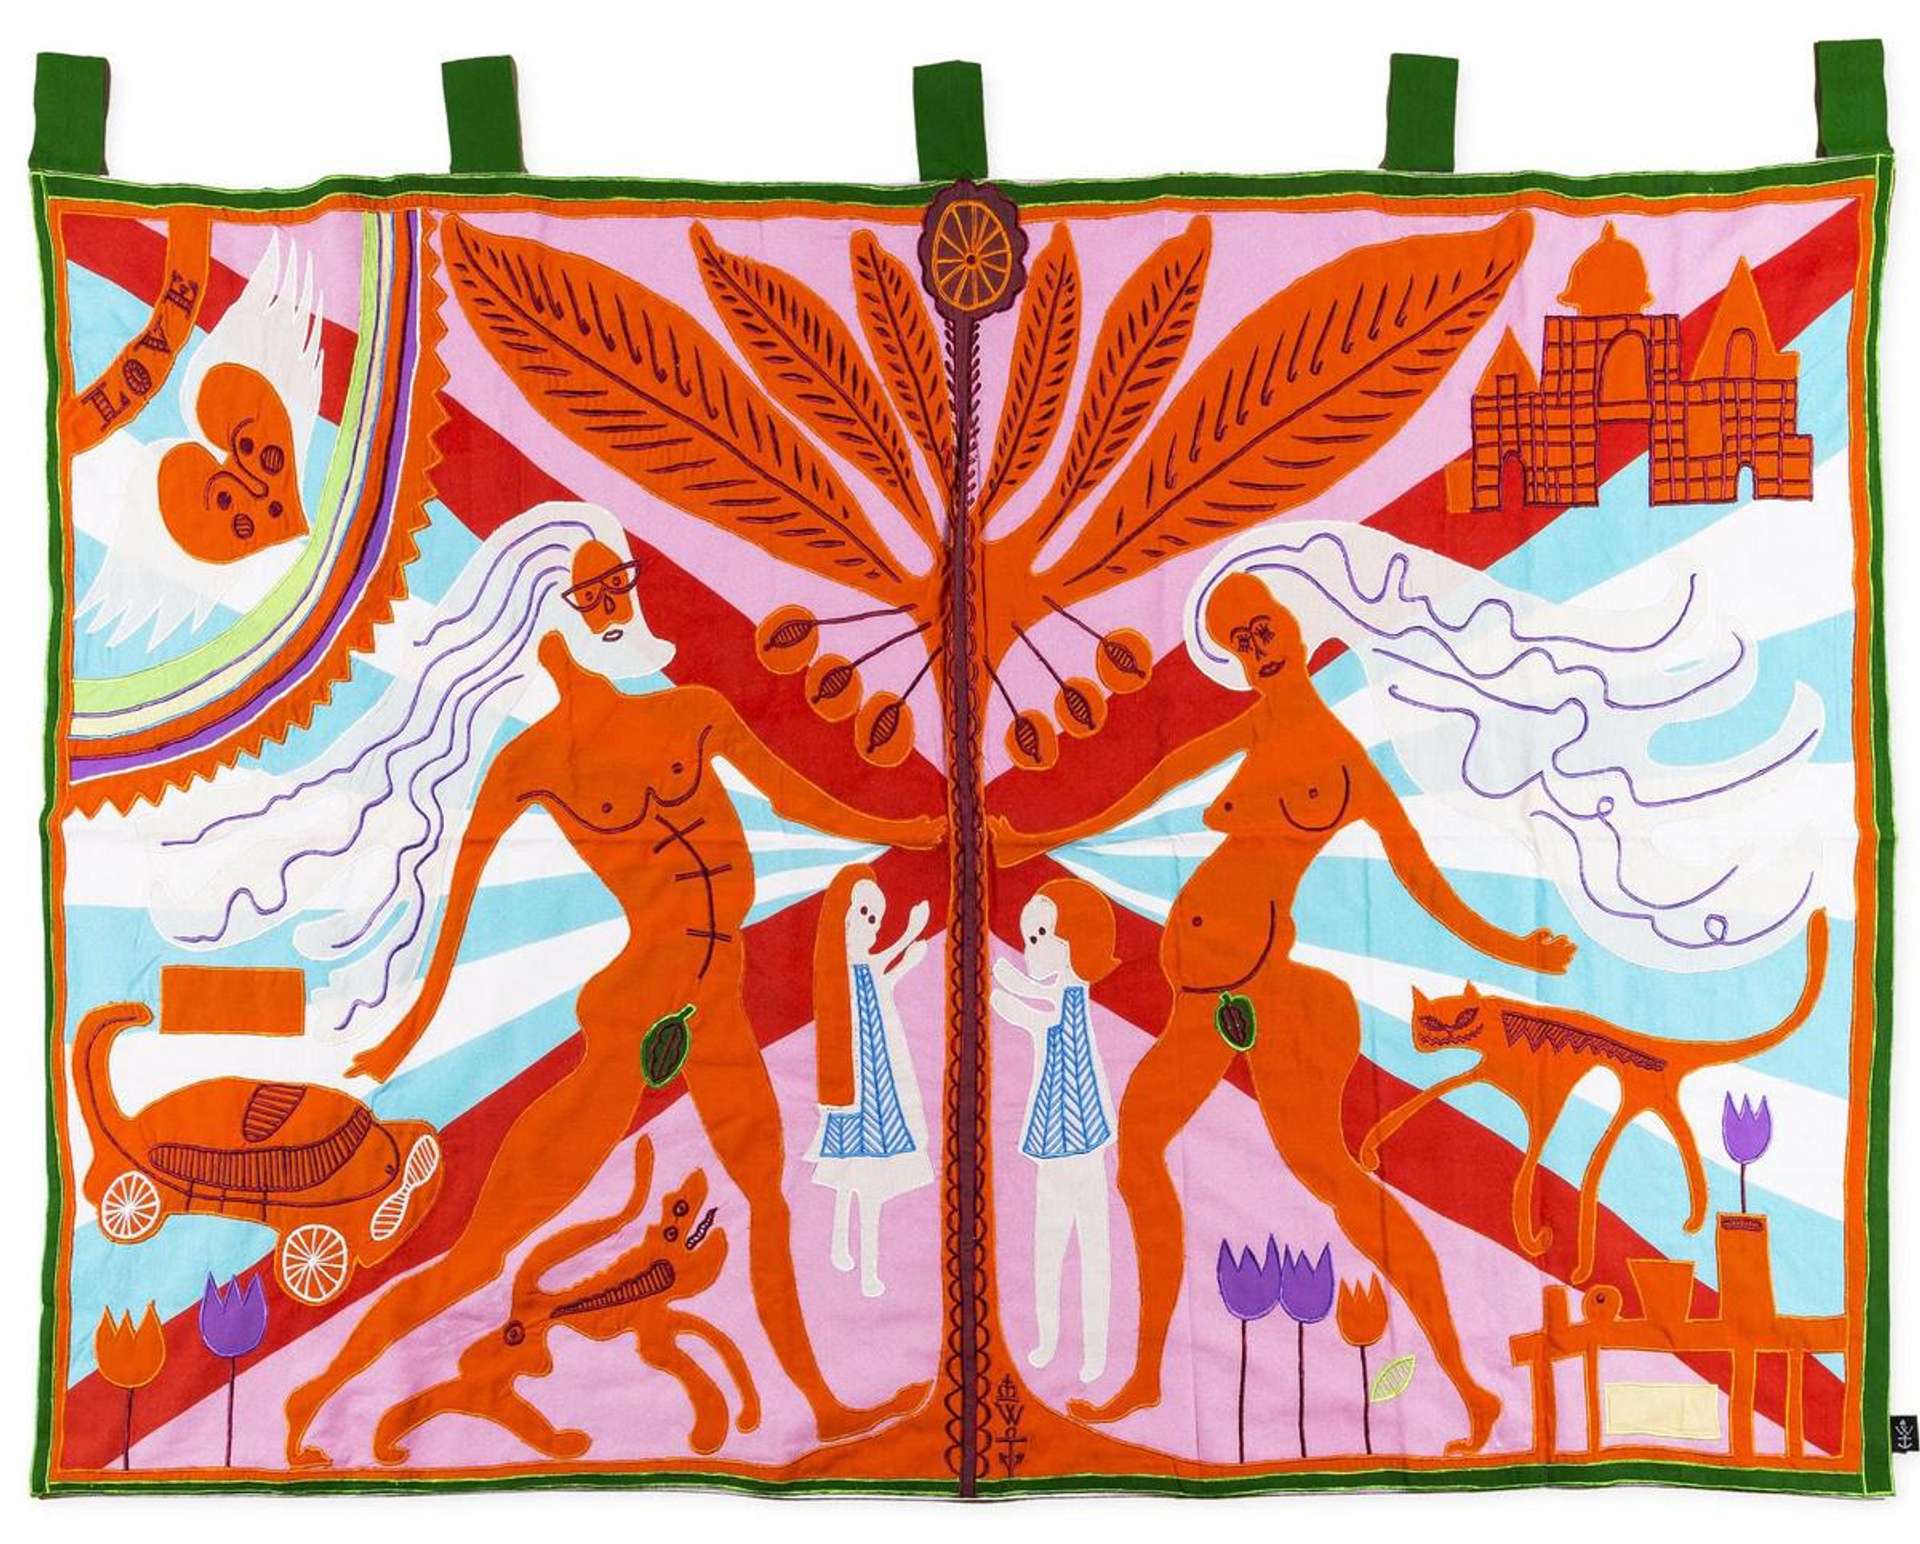 A tapestry by Grayson Perry depicting a flag vertically divided into two sections by the shape of a tree, which separates the characters who look like modern renditions of Adam and Eve. 